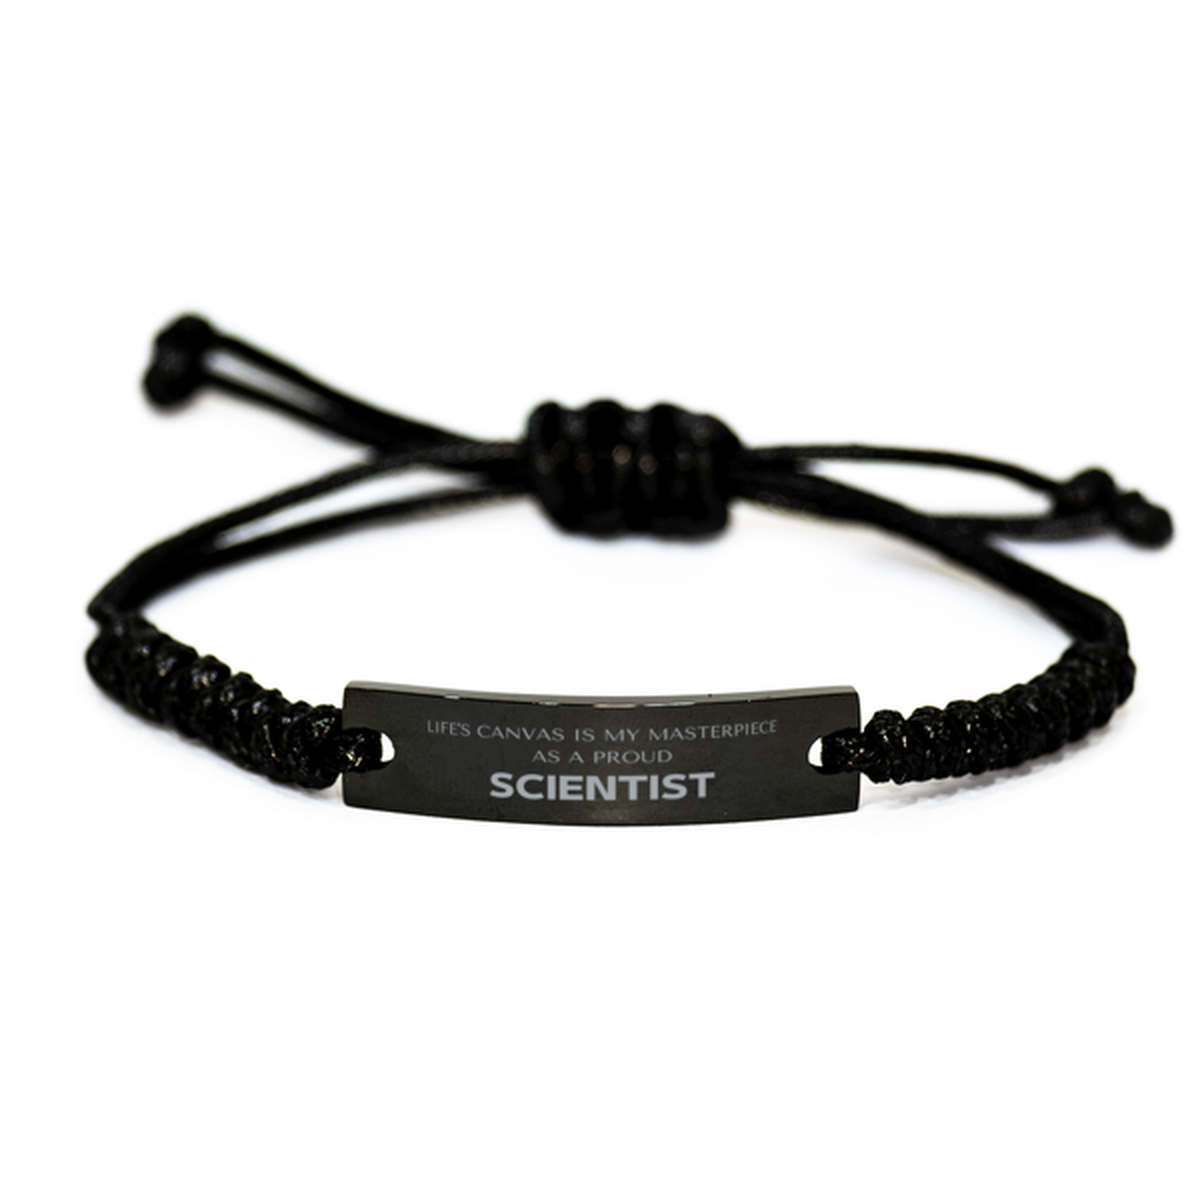 Proud Scientist Gifts, Life's canvas is my masterpiece, Epic Birthday Christmas Unique Black Rope Bracelet For Scientist, Coworkers, Men, Women, Friends